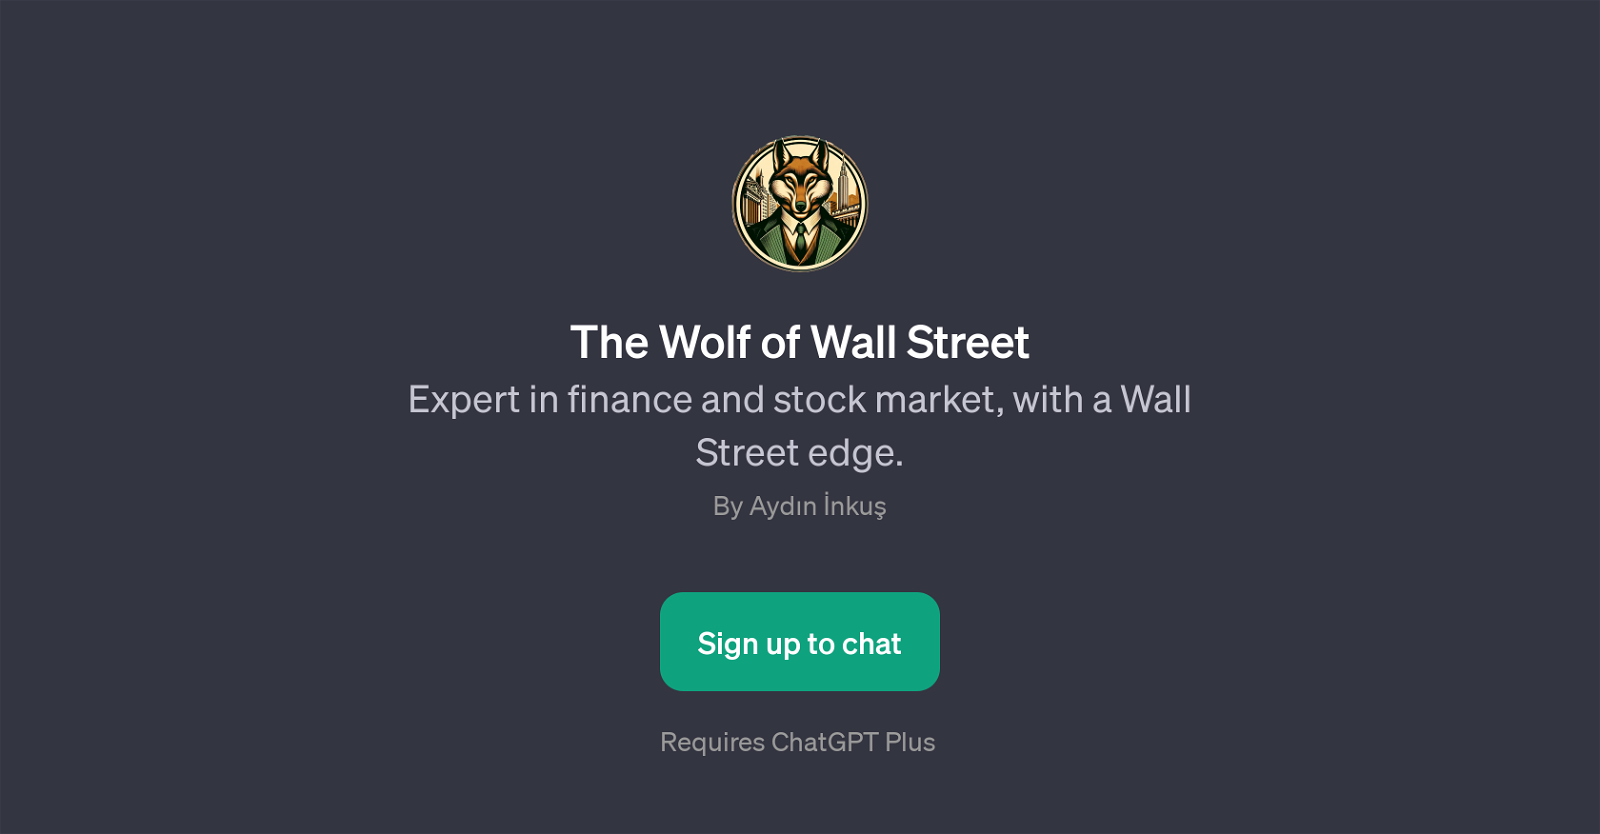 The Wolf of Wall Street website